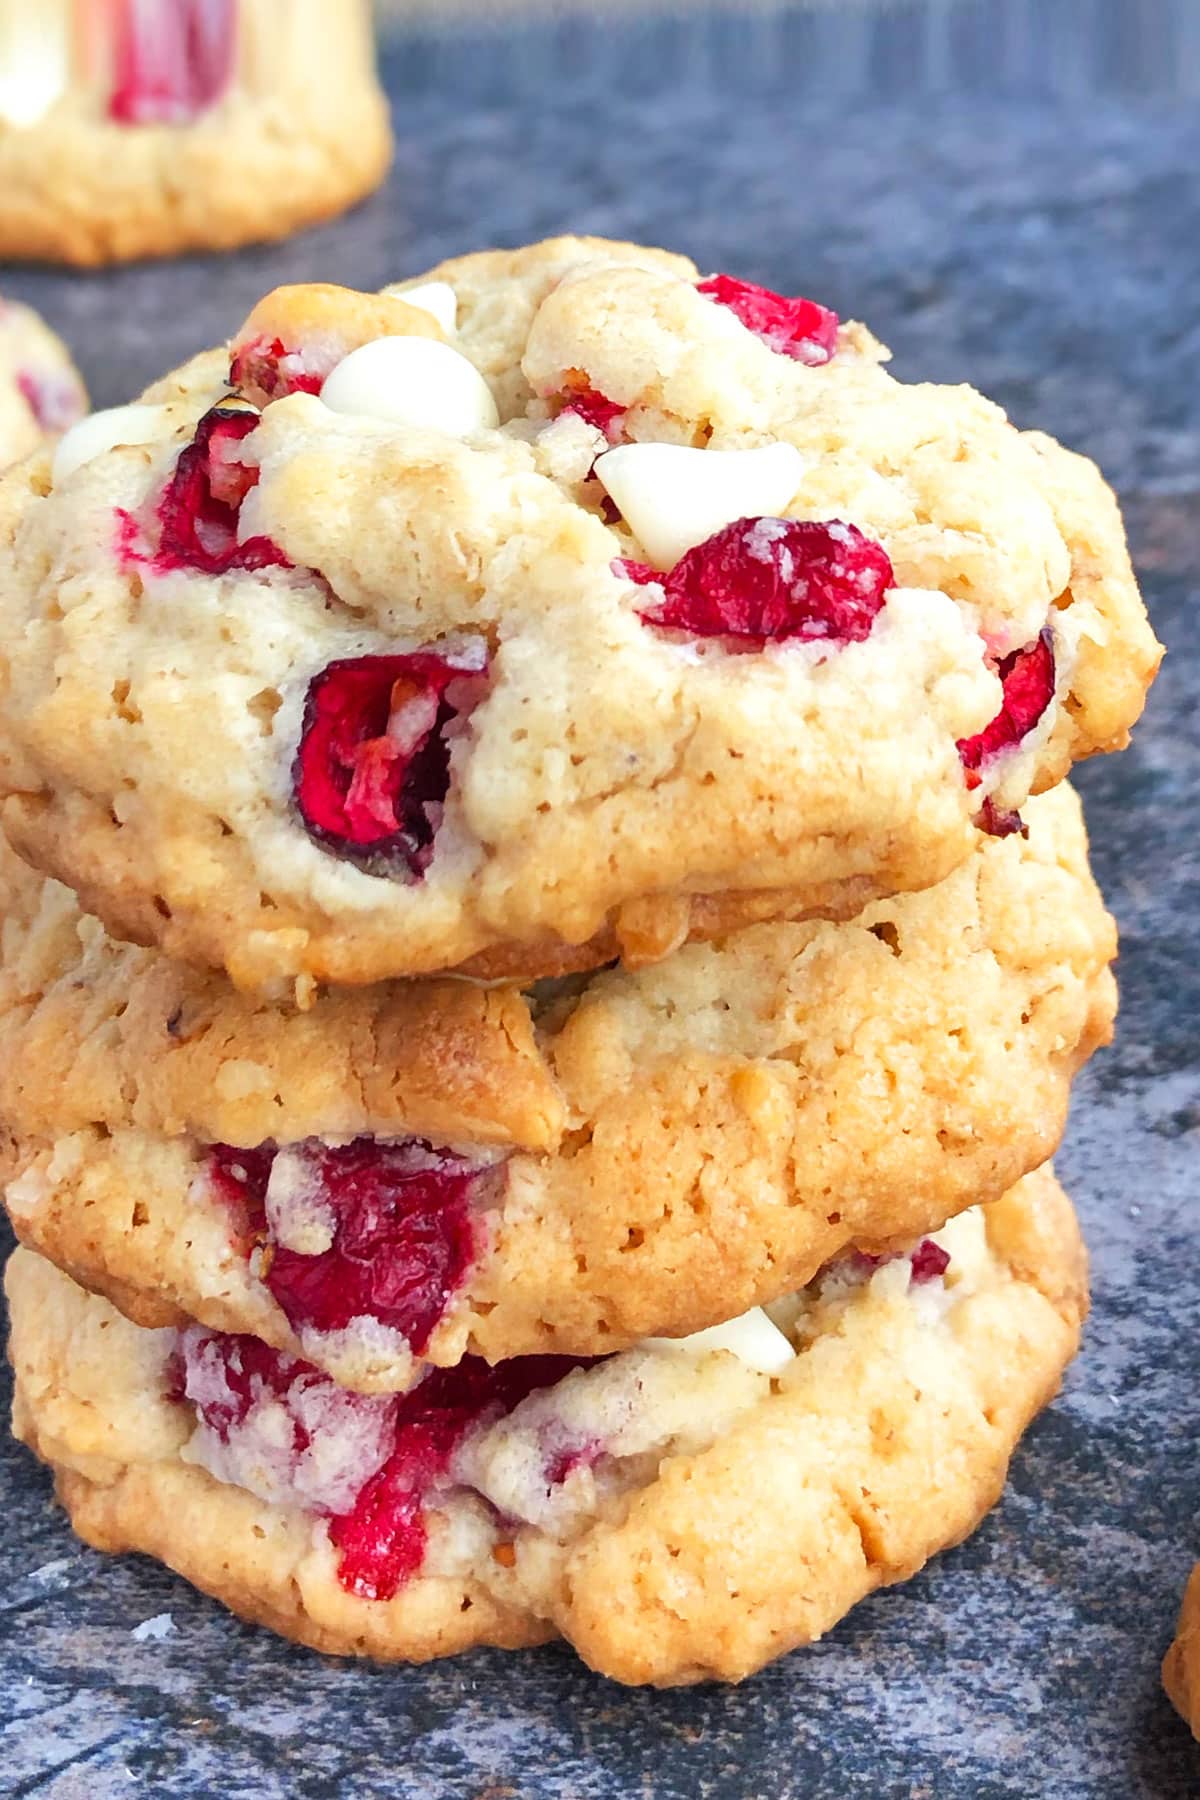 Stack of Fresh Cranberry Cookies With White Chocolate Chips and Oatmeal on Rustic Gray Background.